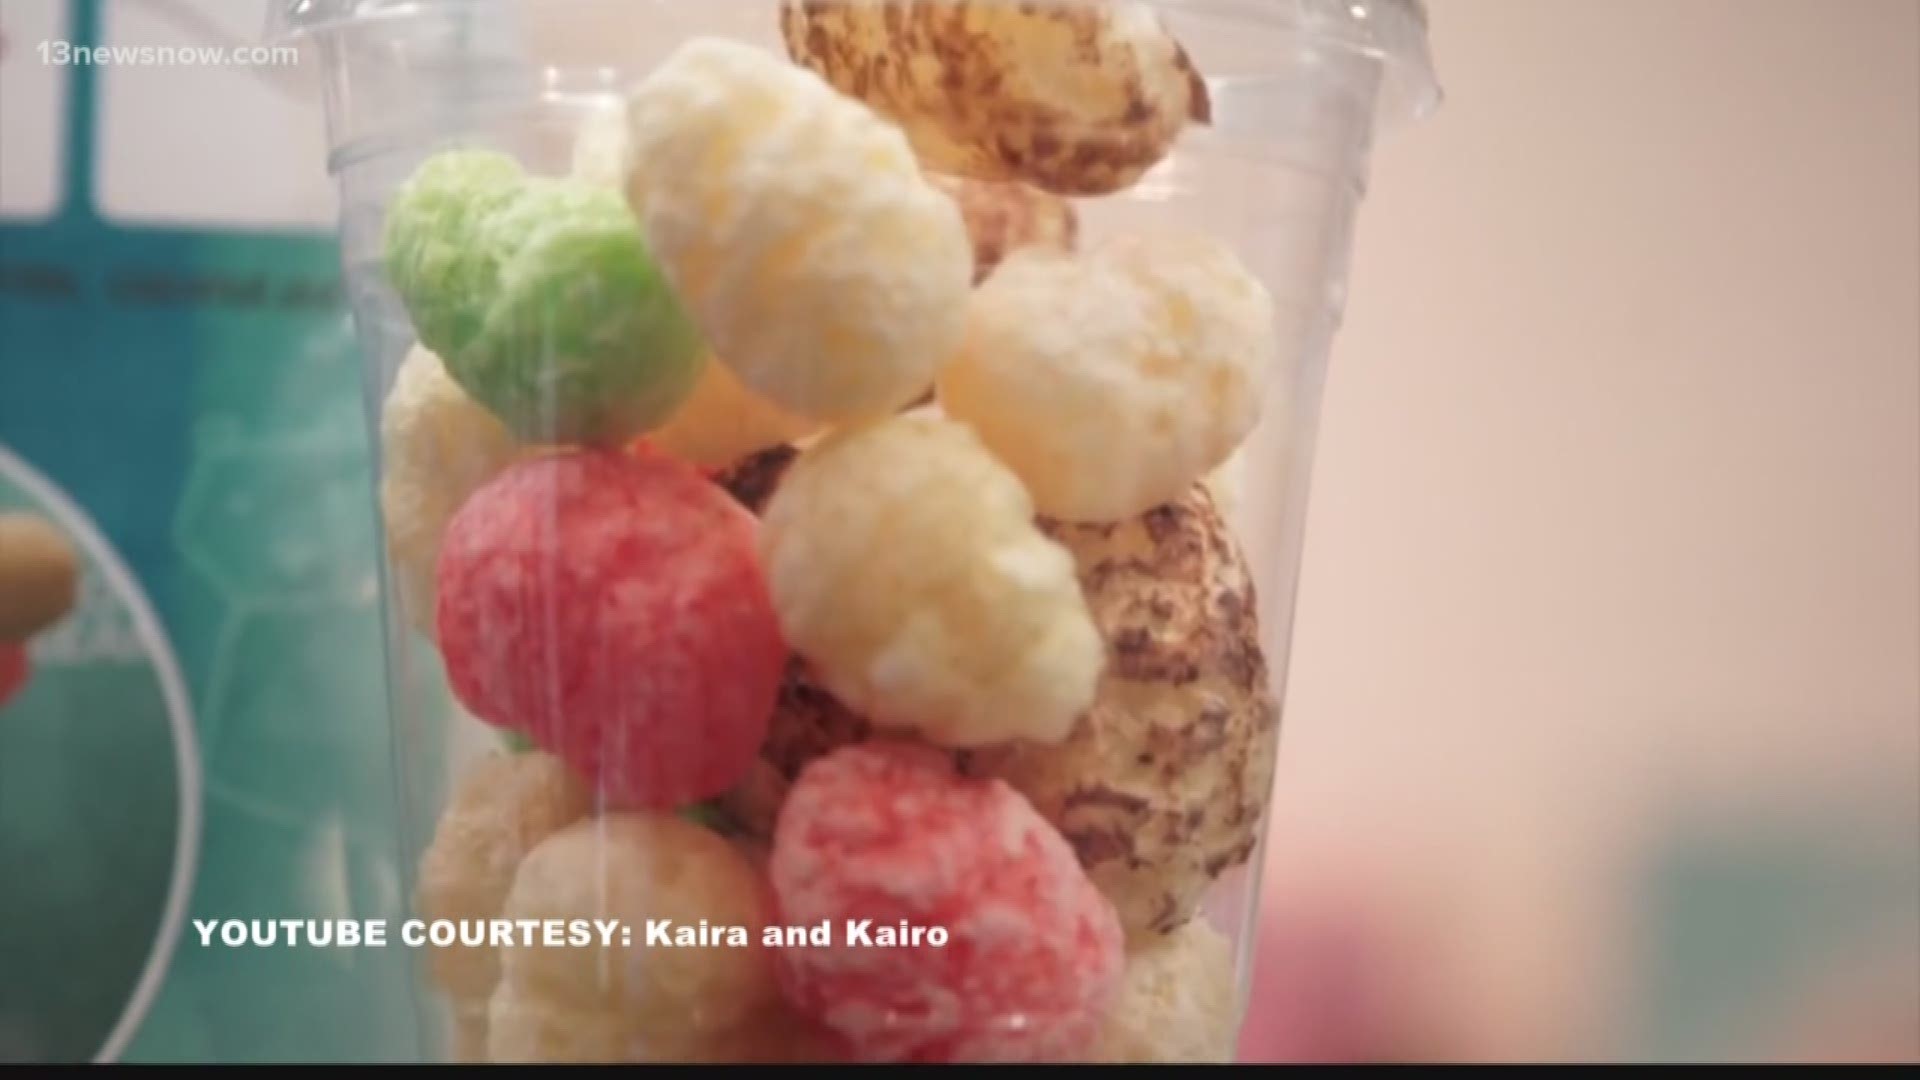 The FDA and Doctors are warning against Dragon's Breath, liquid nitrogen soaked cereal puffs. The sweet treat gets its name because people who choose to eat it look like they're exhaling smoke. While it may look cool it's dangerous.